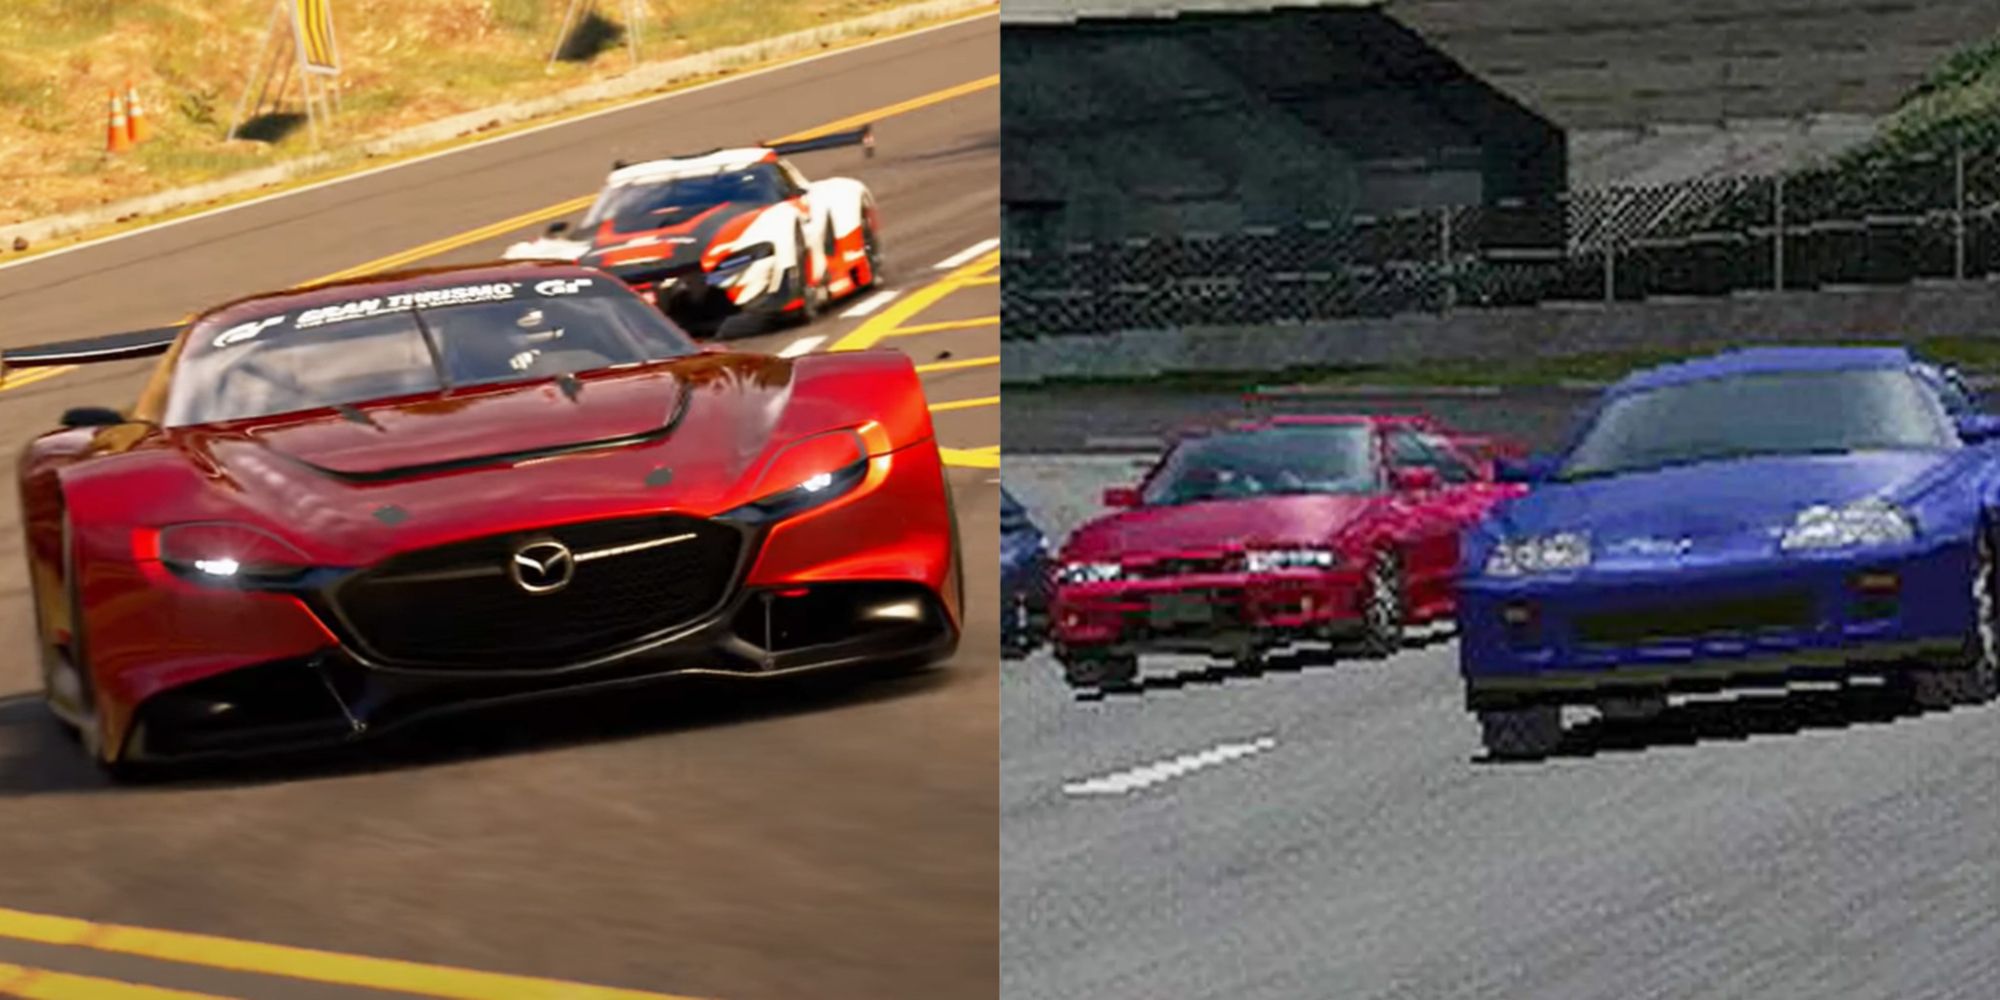 Split image of cars in Gran Turismo 7 and 1